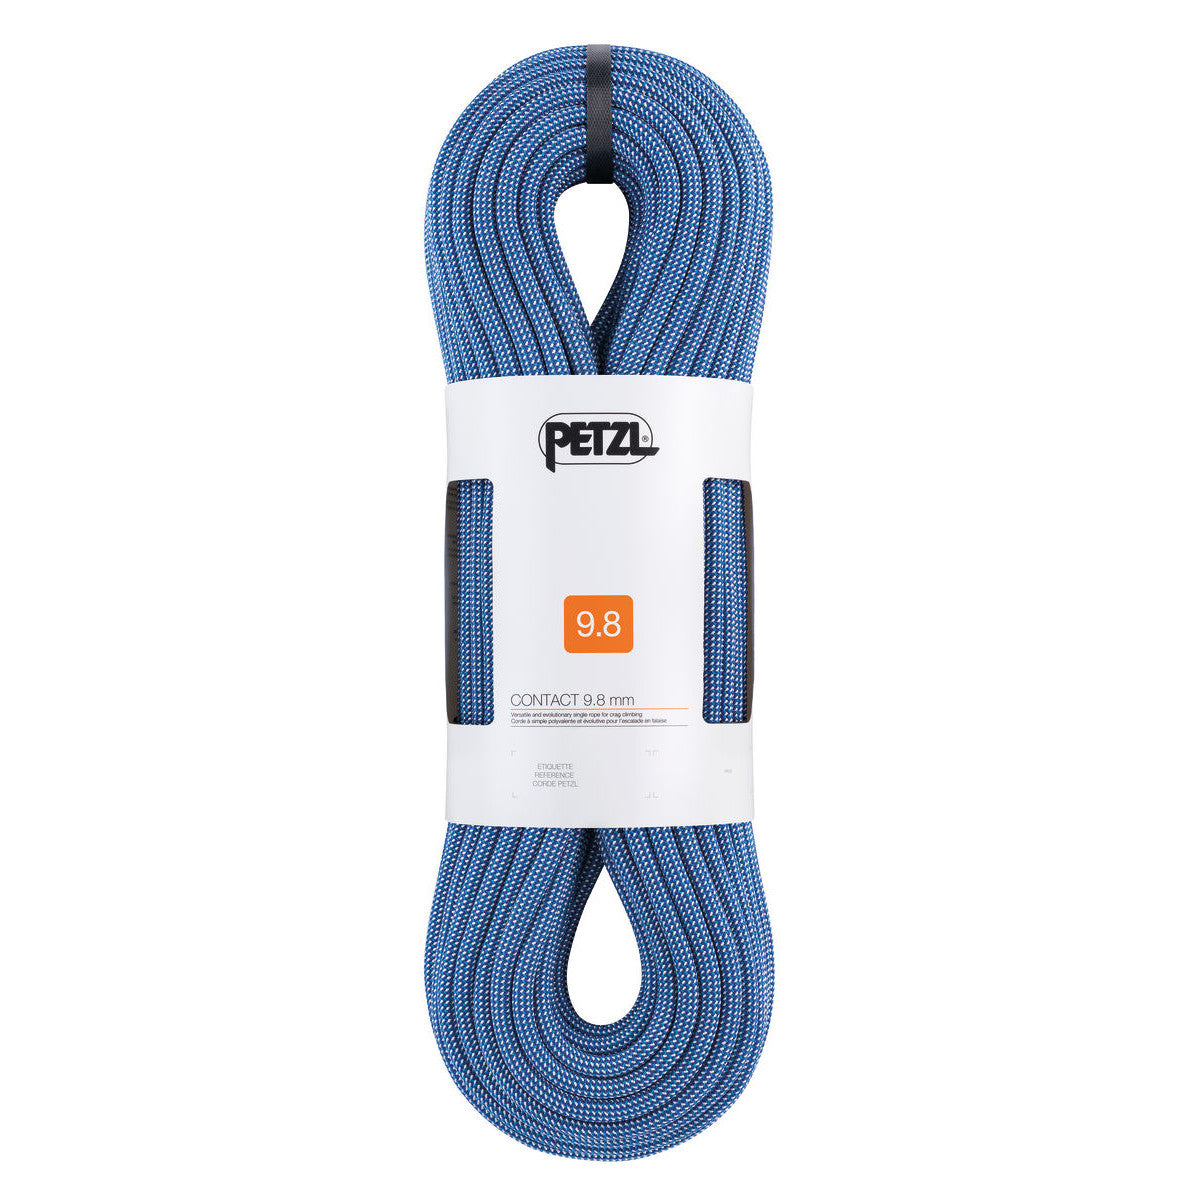 Petzl Contact 9.8mm 80m rope in blue